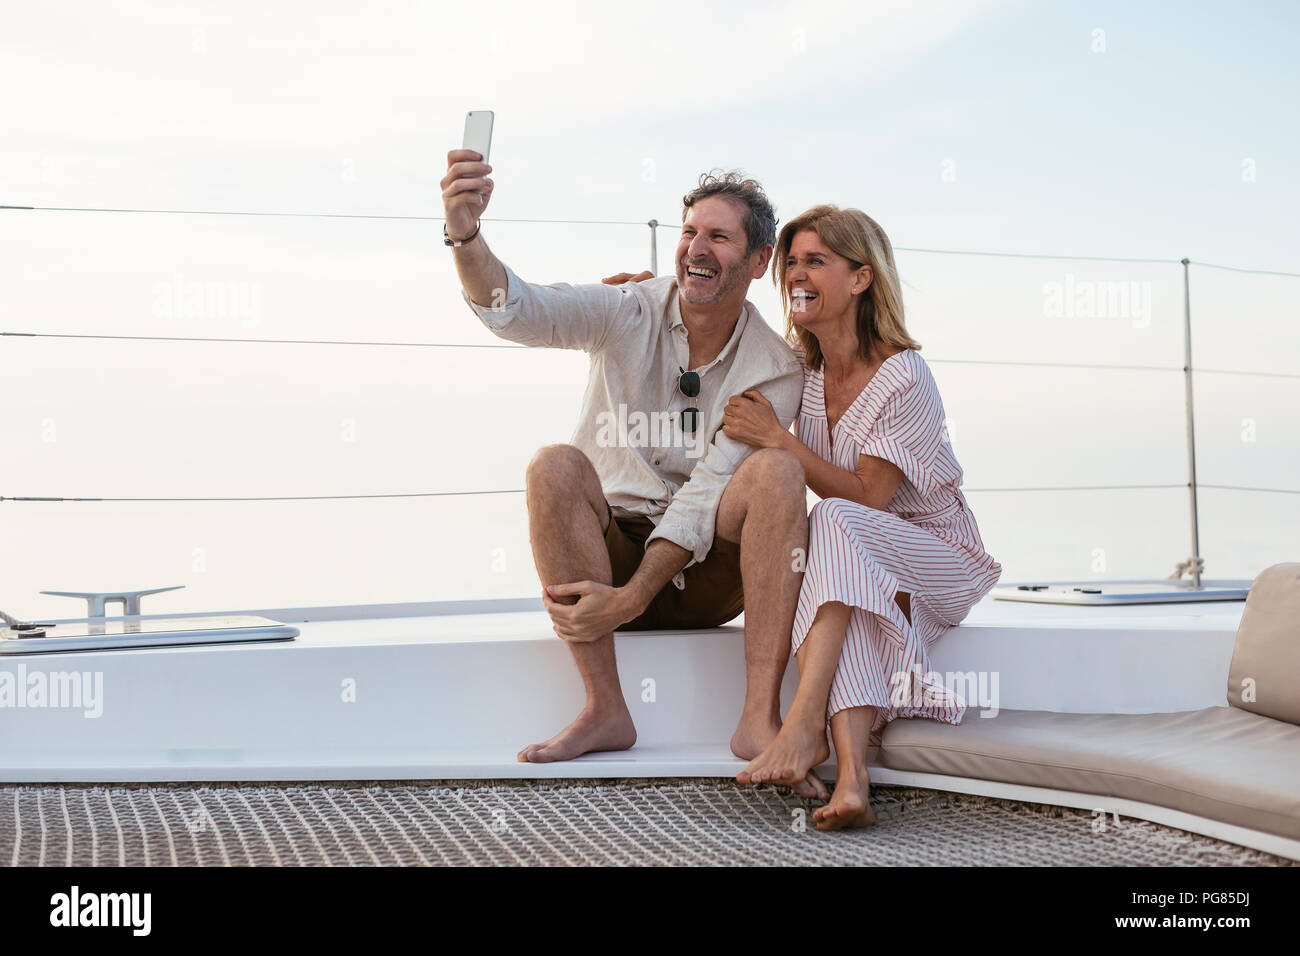 Happy couple on a sailing trip taking selfies Stock Photo